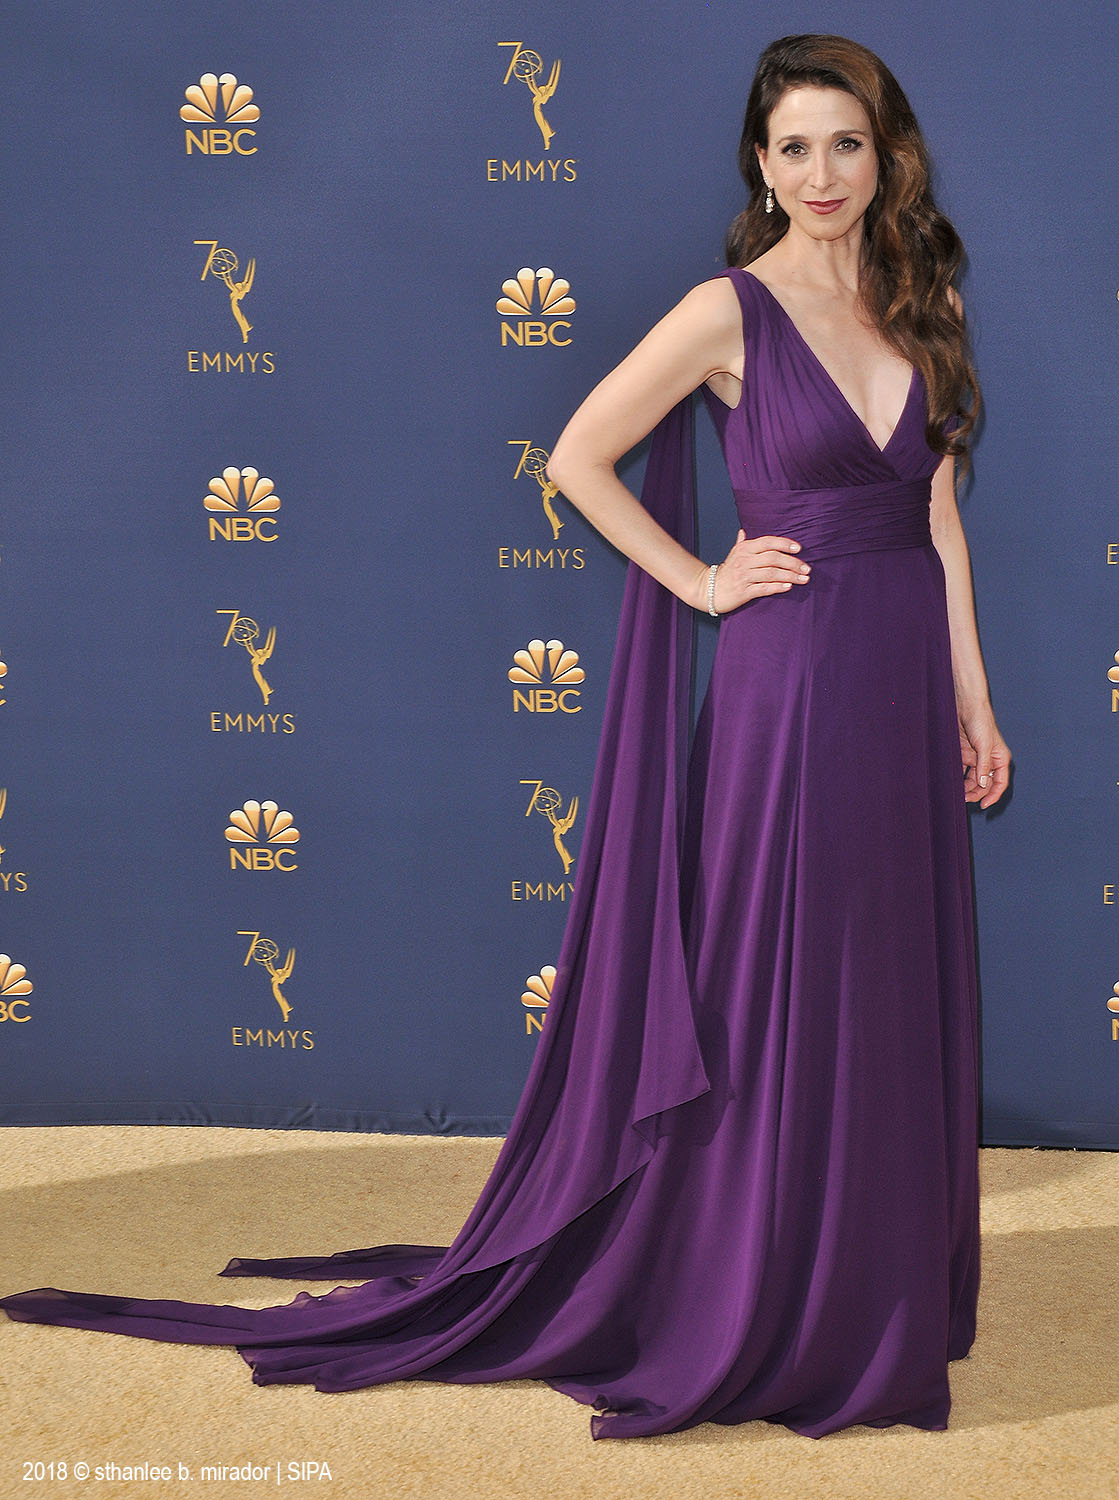 Marin Hinkle in Oliver Tolentino at 70th Emmy Awards 2018 Emmys 